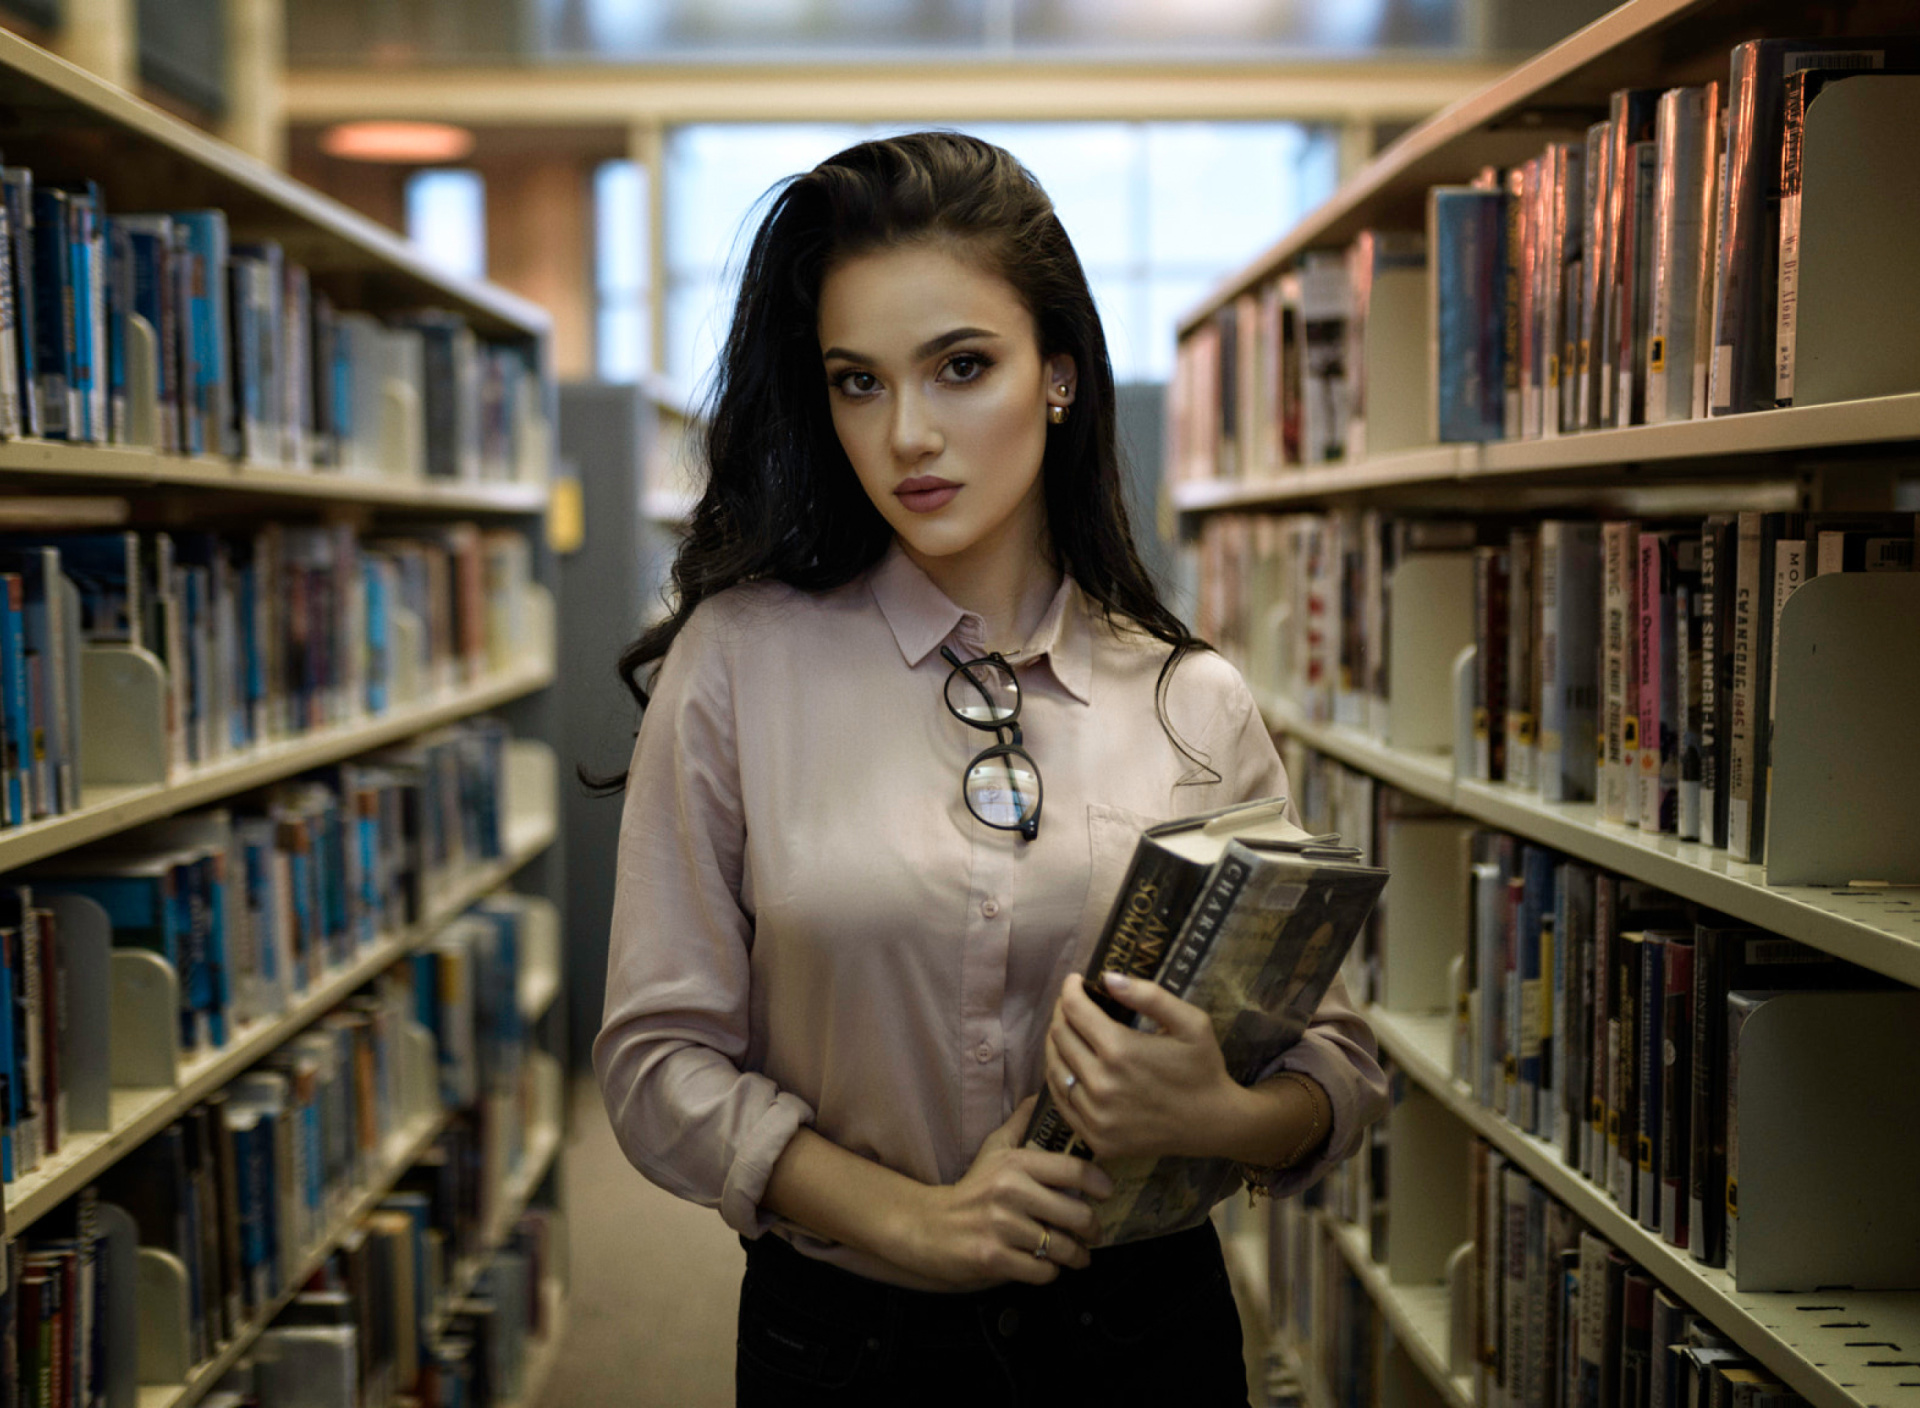 Das Girl with books in library Wallpaper 1920x1408